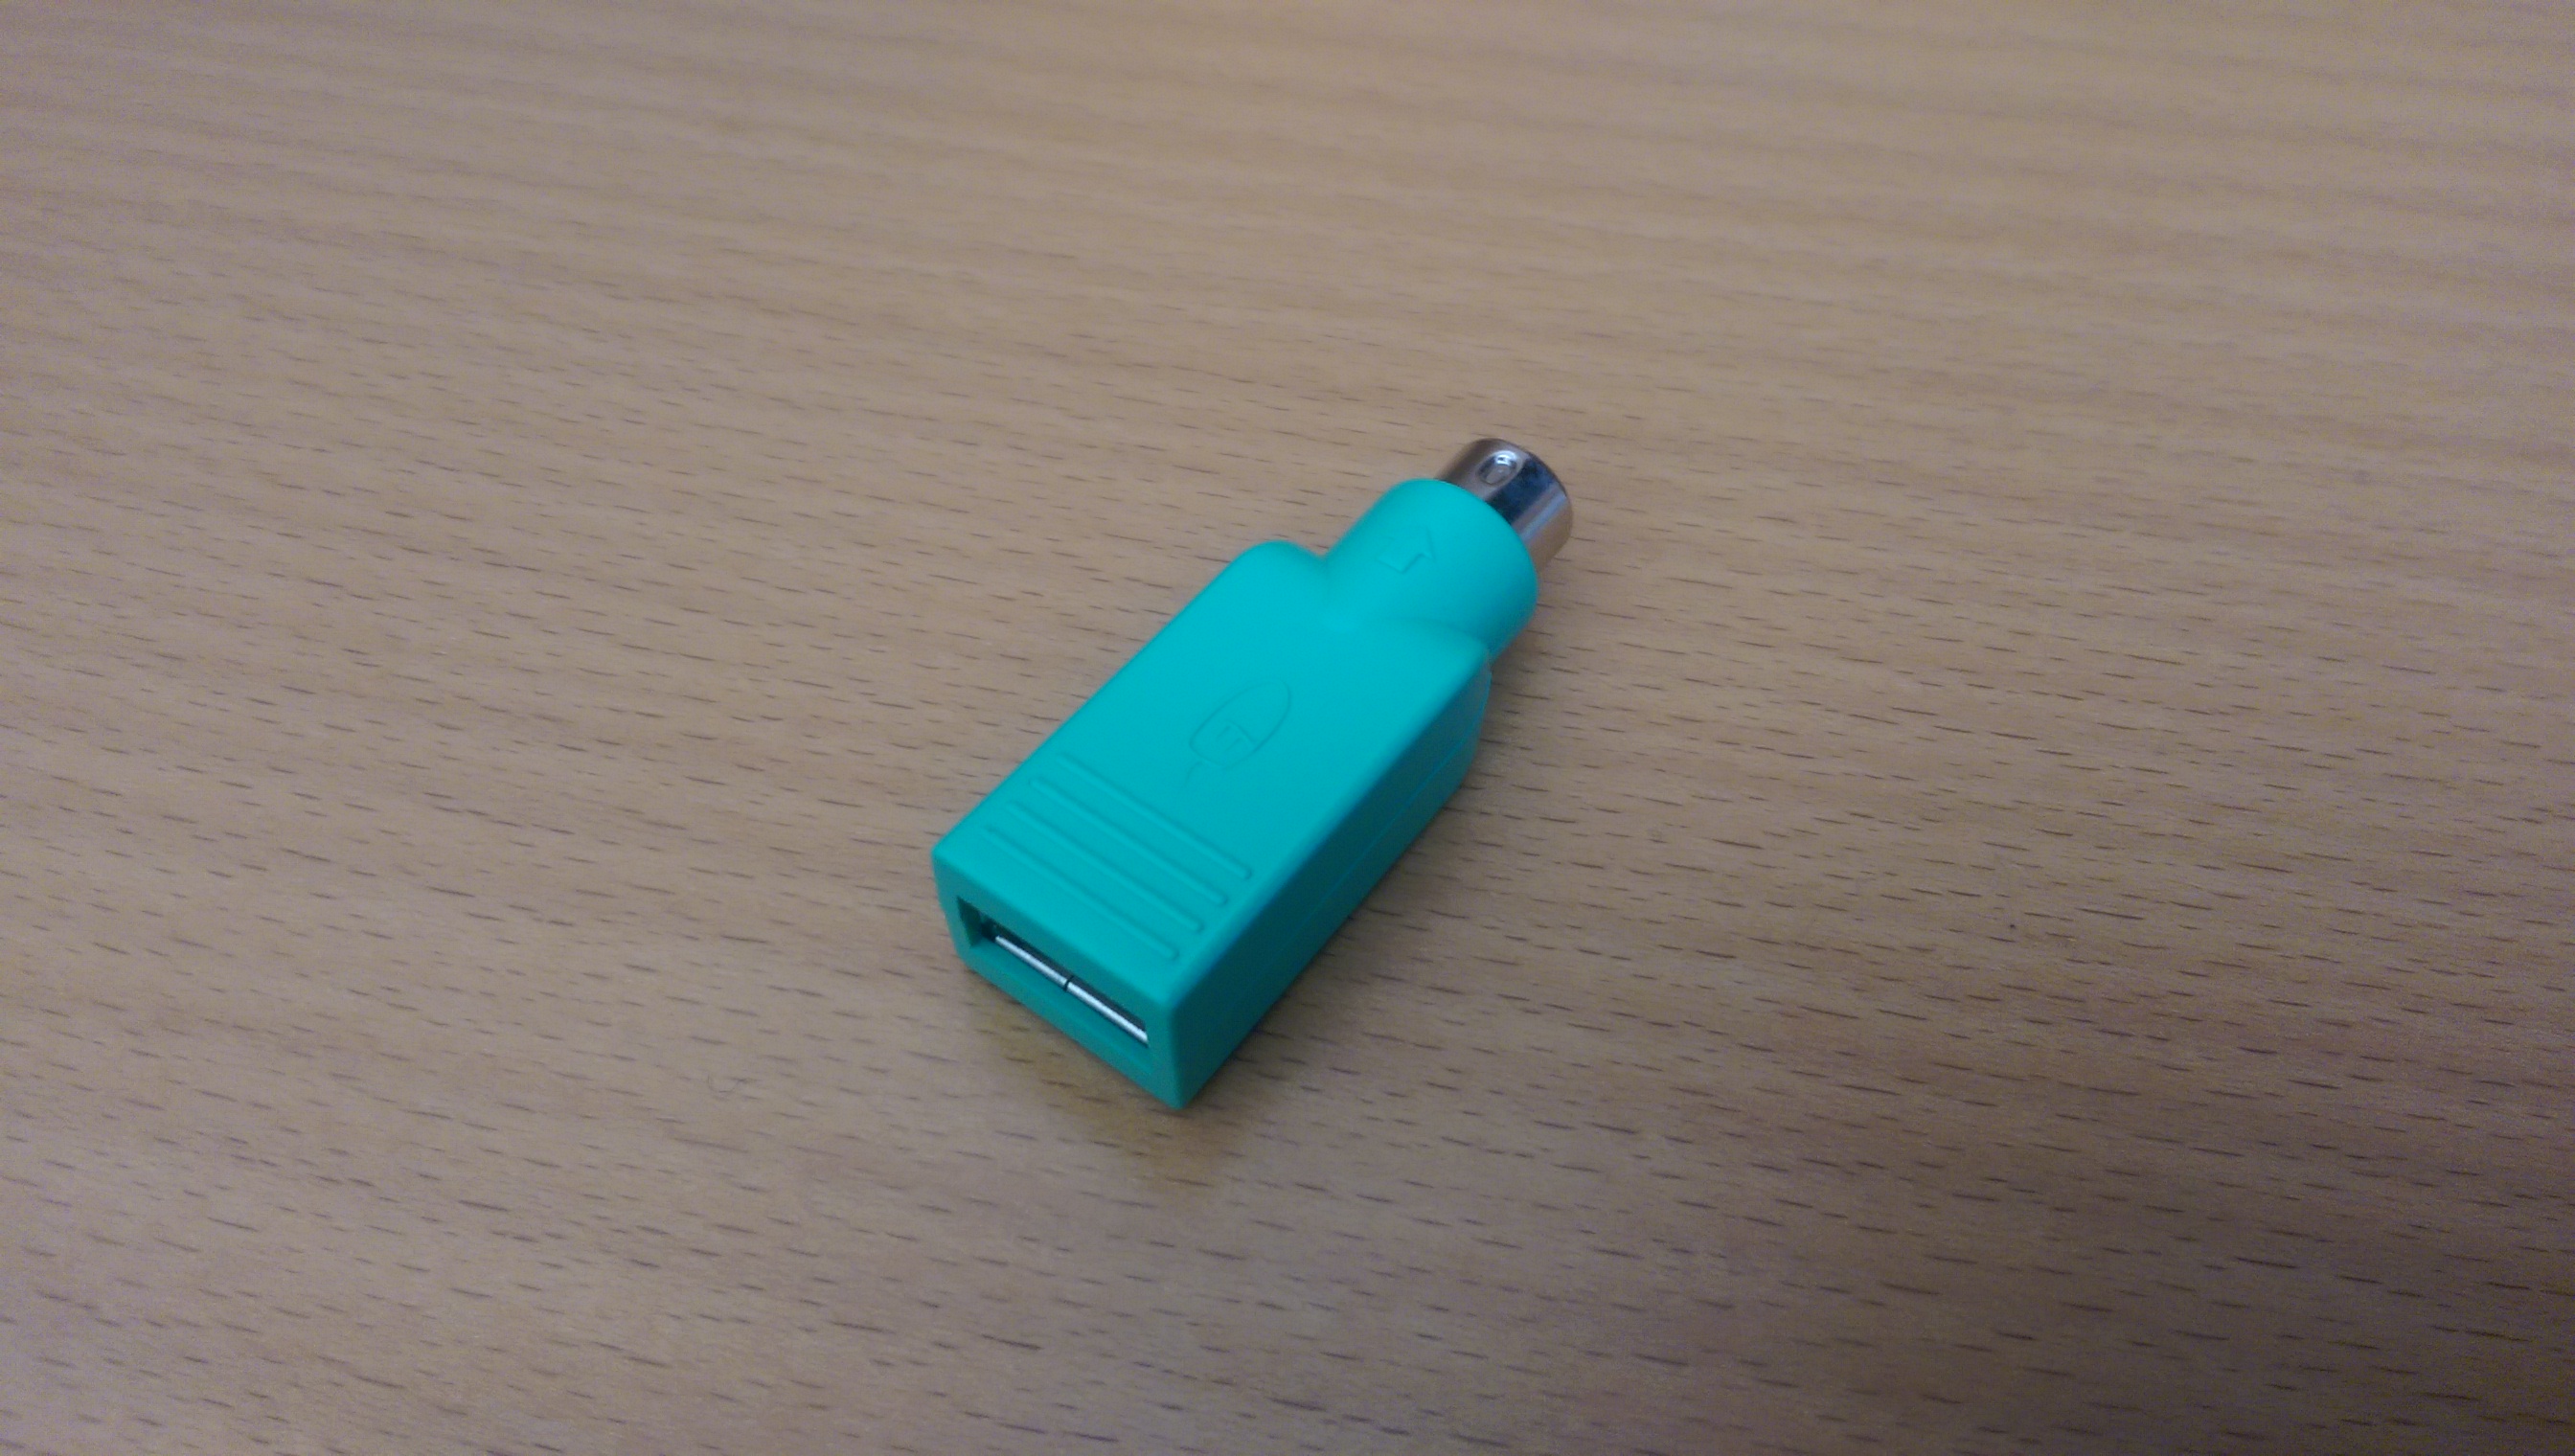 Ps2 to usb converter photo